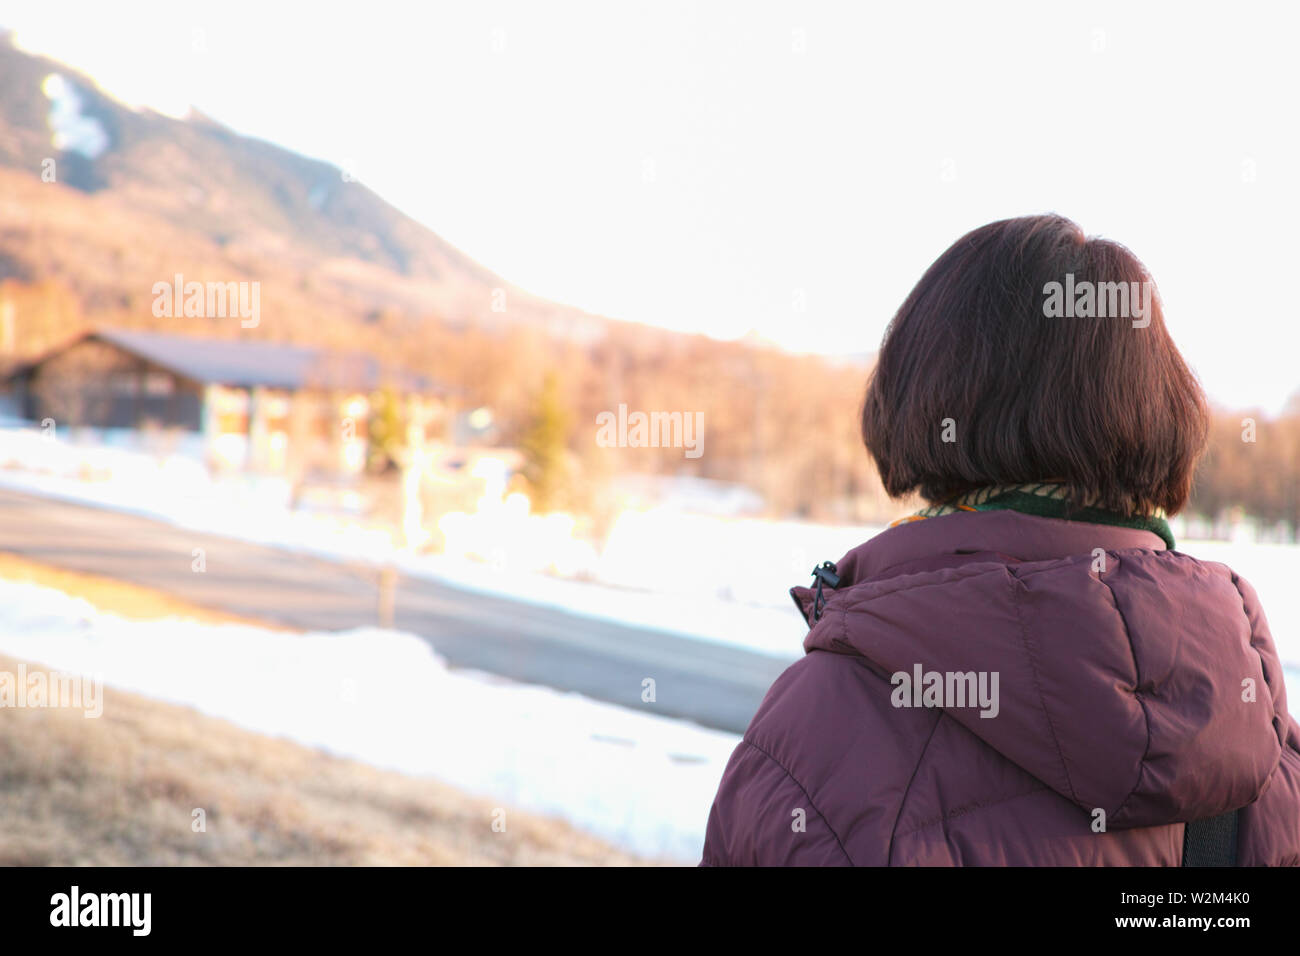 The back of a woman's head as she observes Winter scenery Stock Photo